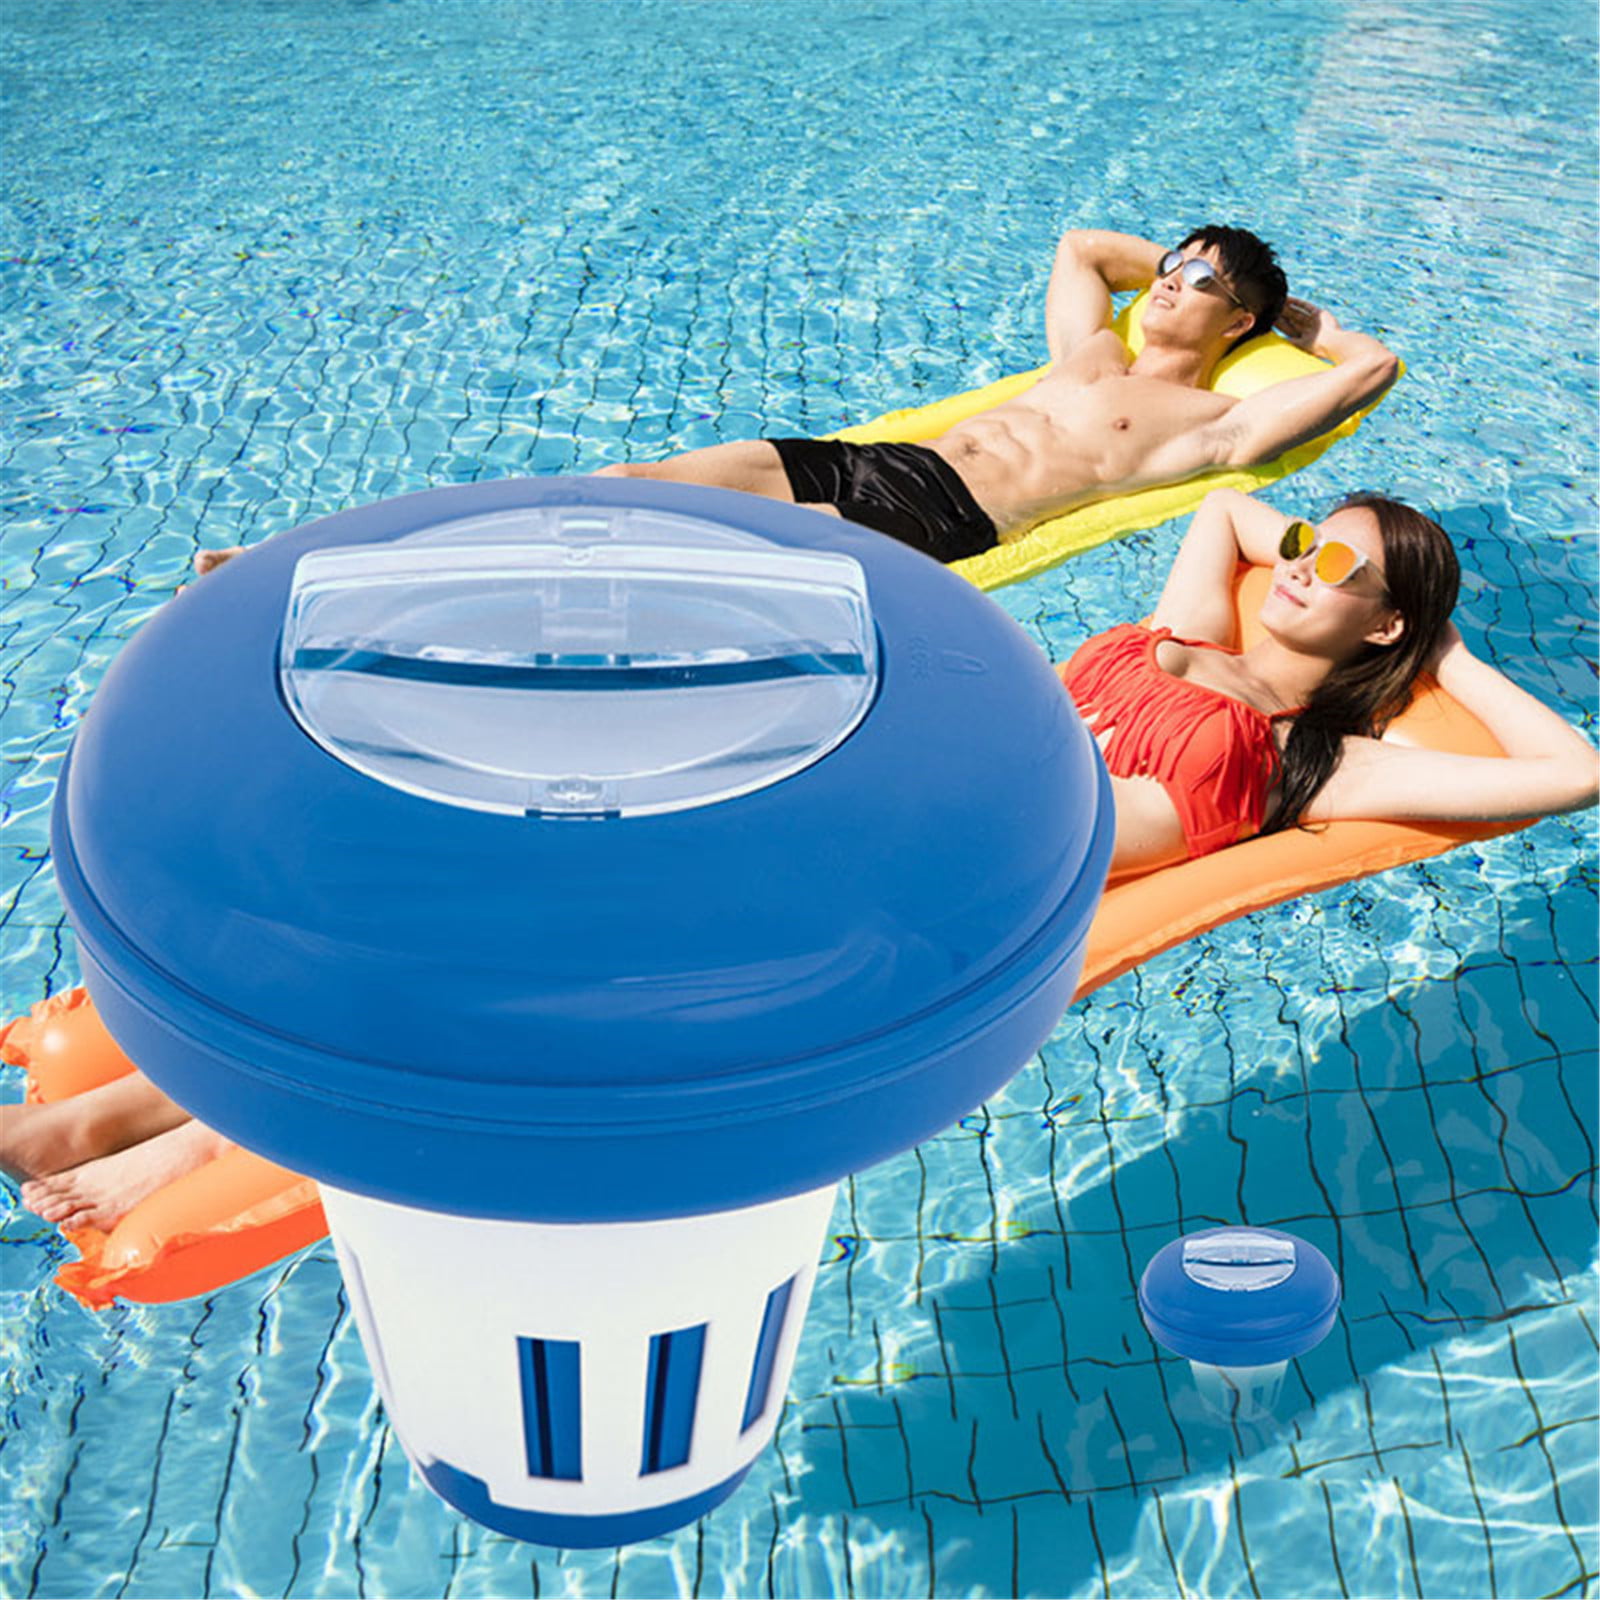 LtrottedJ 5 inch Deluxe Large Blue and White Floating Swimming Pool， Chlorine Dispenser 